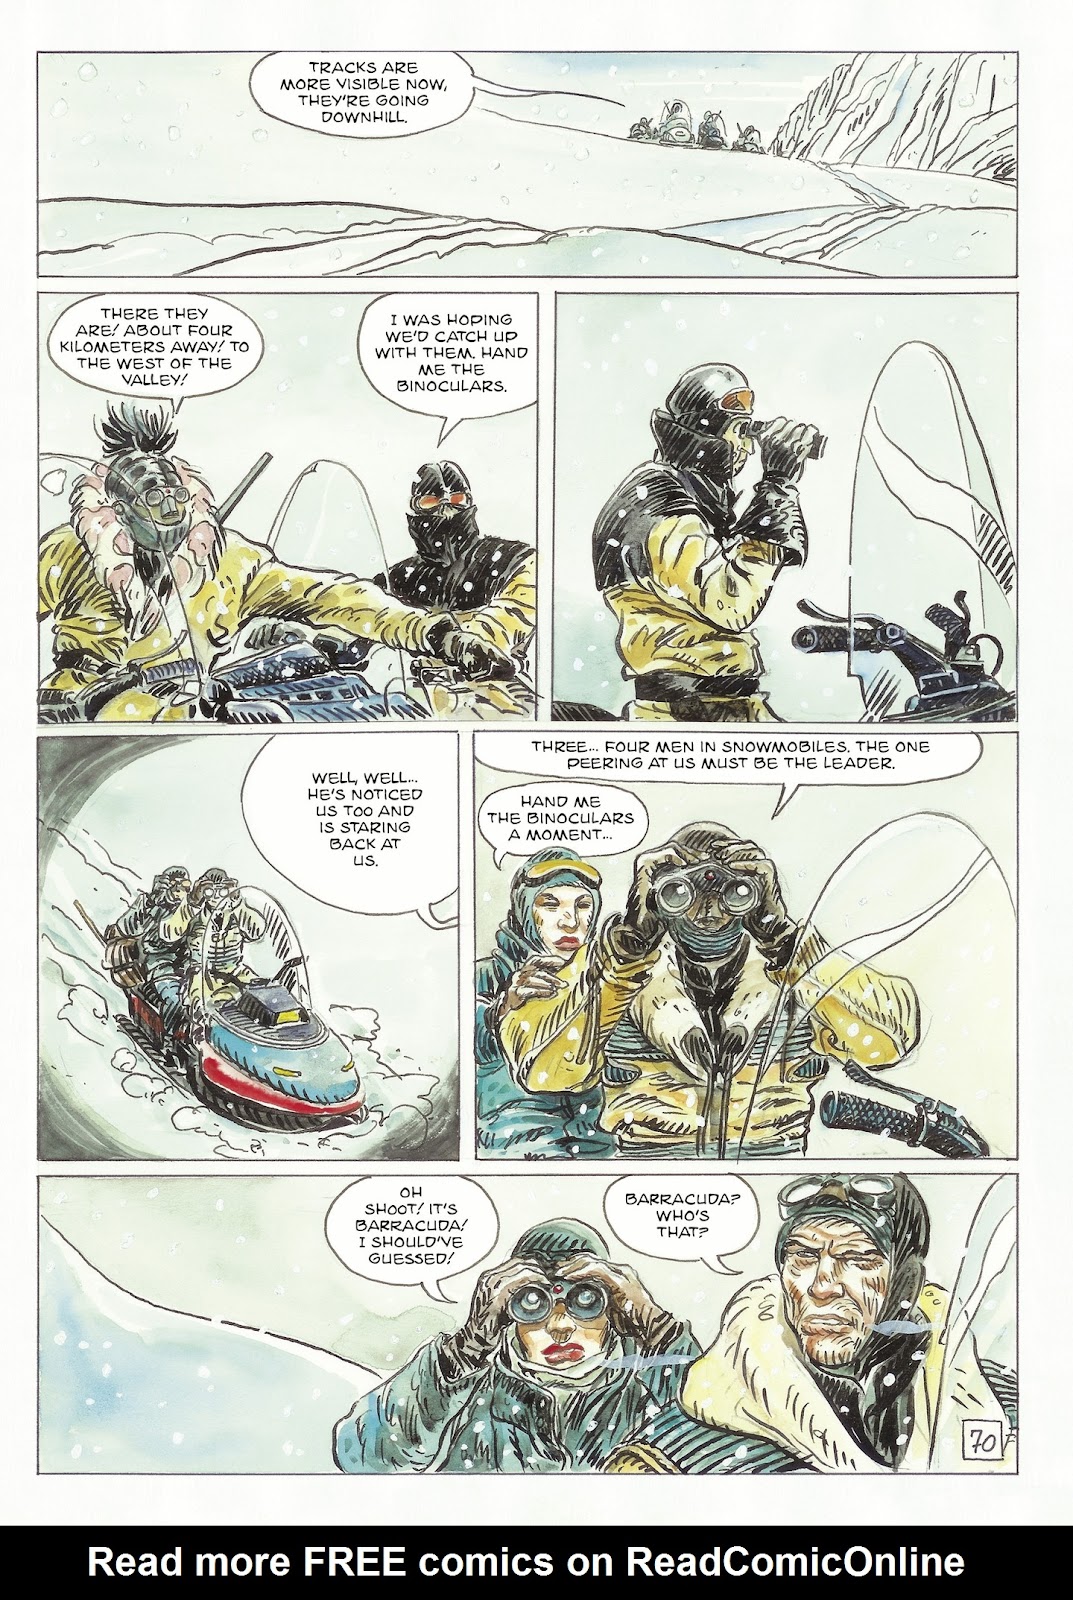 The Man With the Bear issue 2 - Page 16